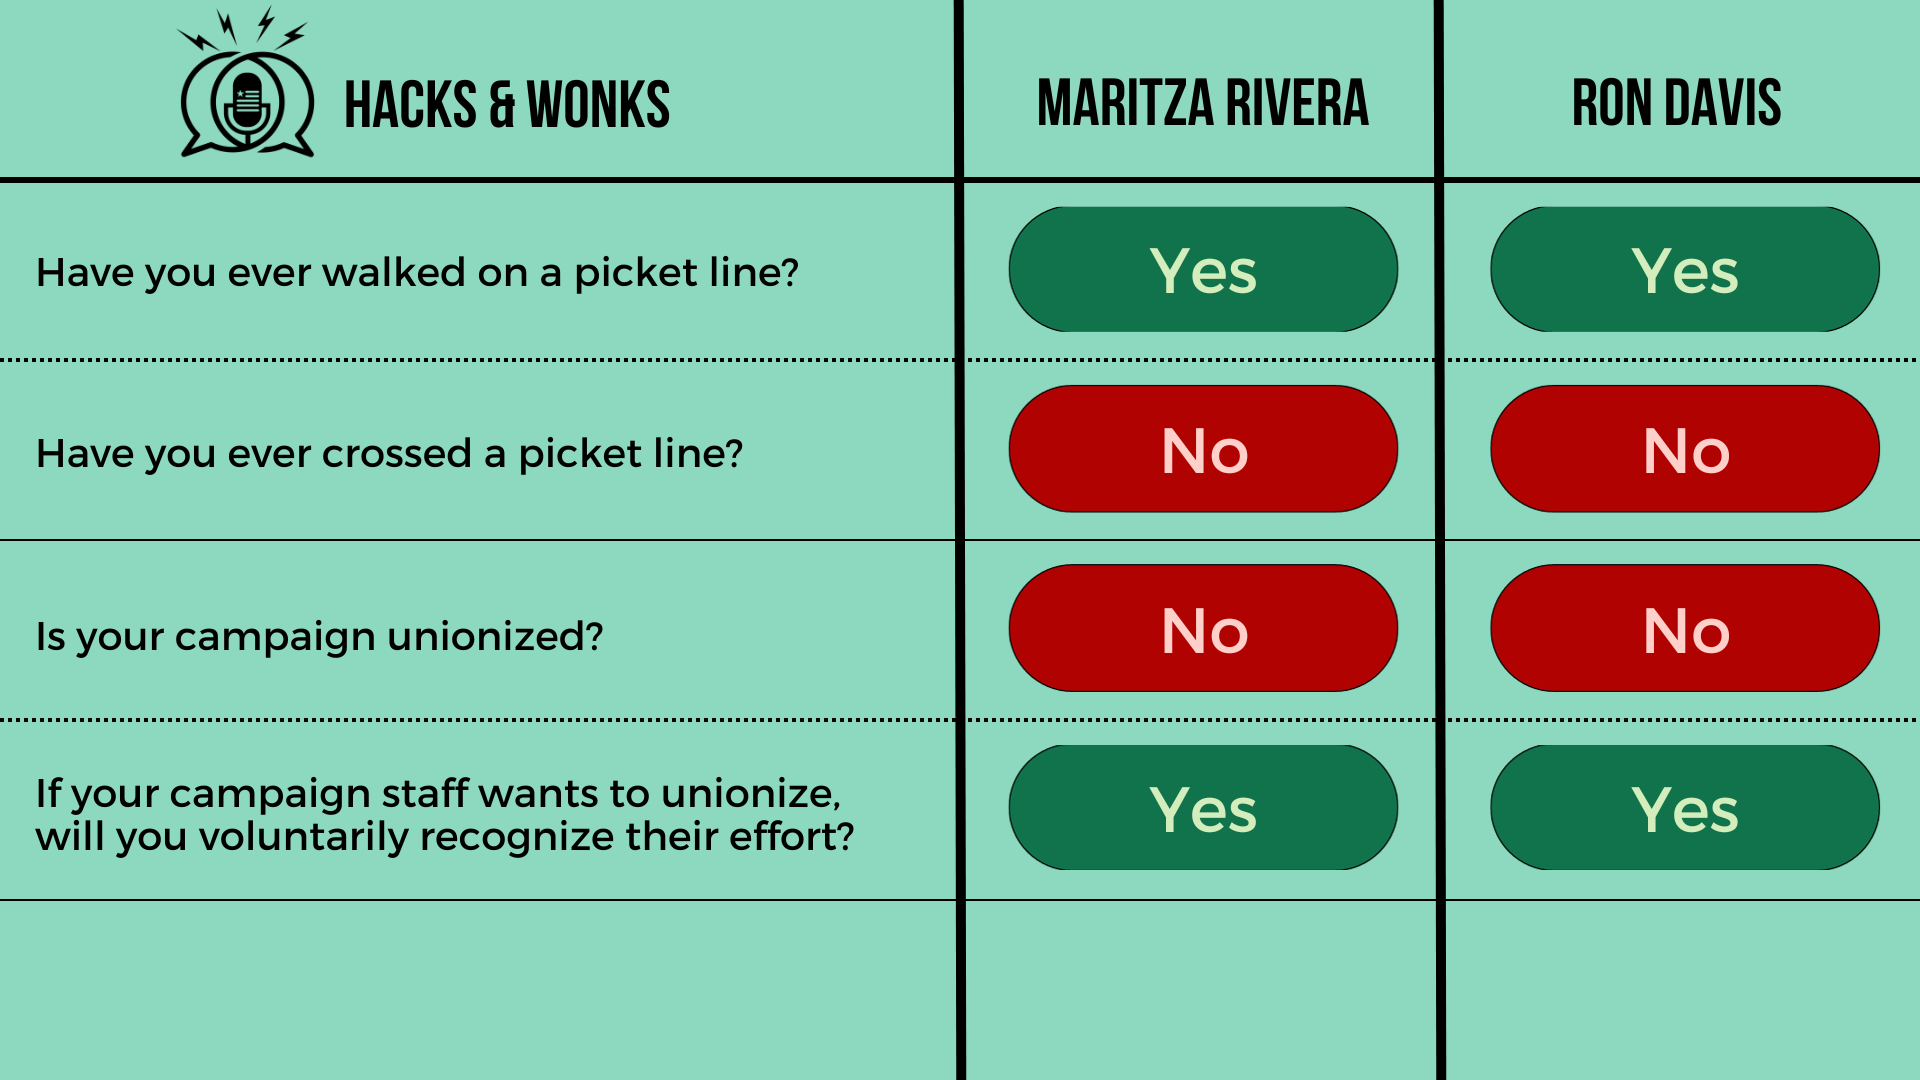 Q: Have you ever walked on a picket line? Maritza Rivera: Yes, Ron Davis: Yes  Q: Have you ever crossed a picket line? Maritza Rivera: No, Ron Davis: No  Q: Is your campaign unionized? Maritza Rivera: No, Ron Davis: No  Q: If your campaign staff want